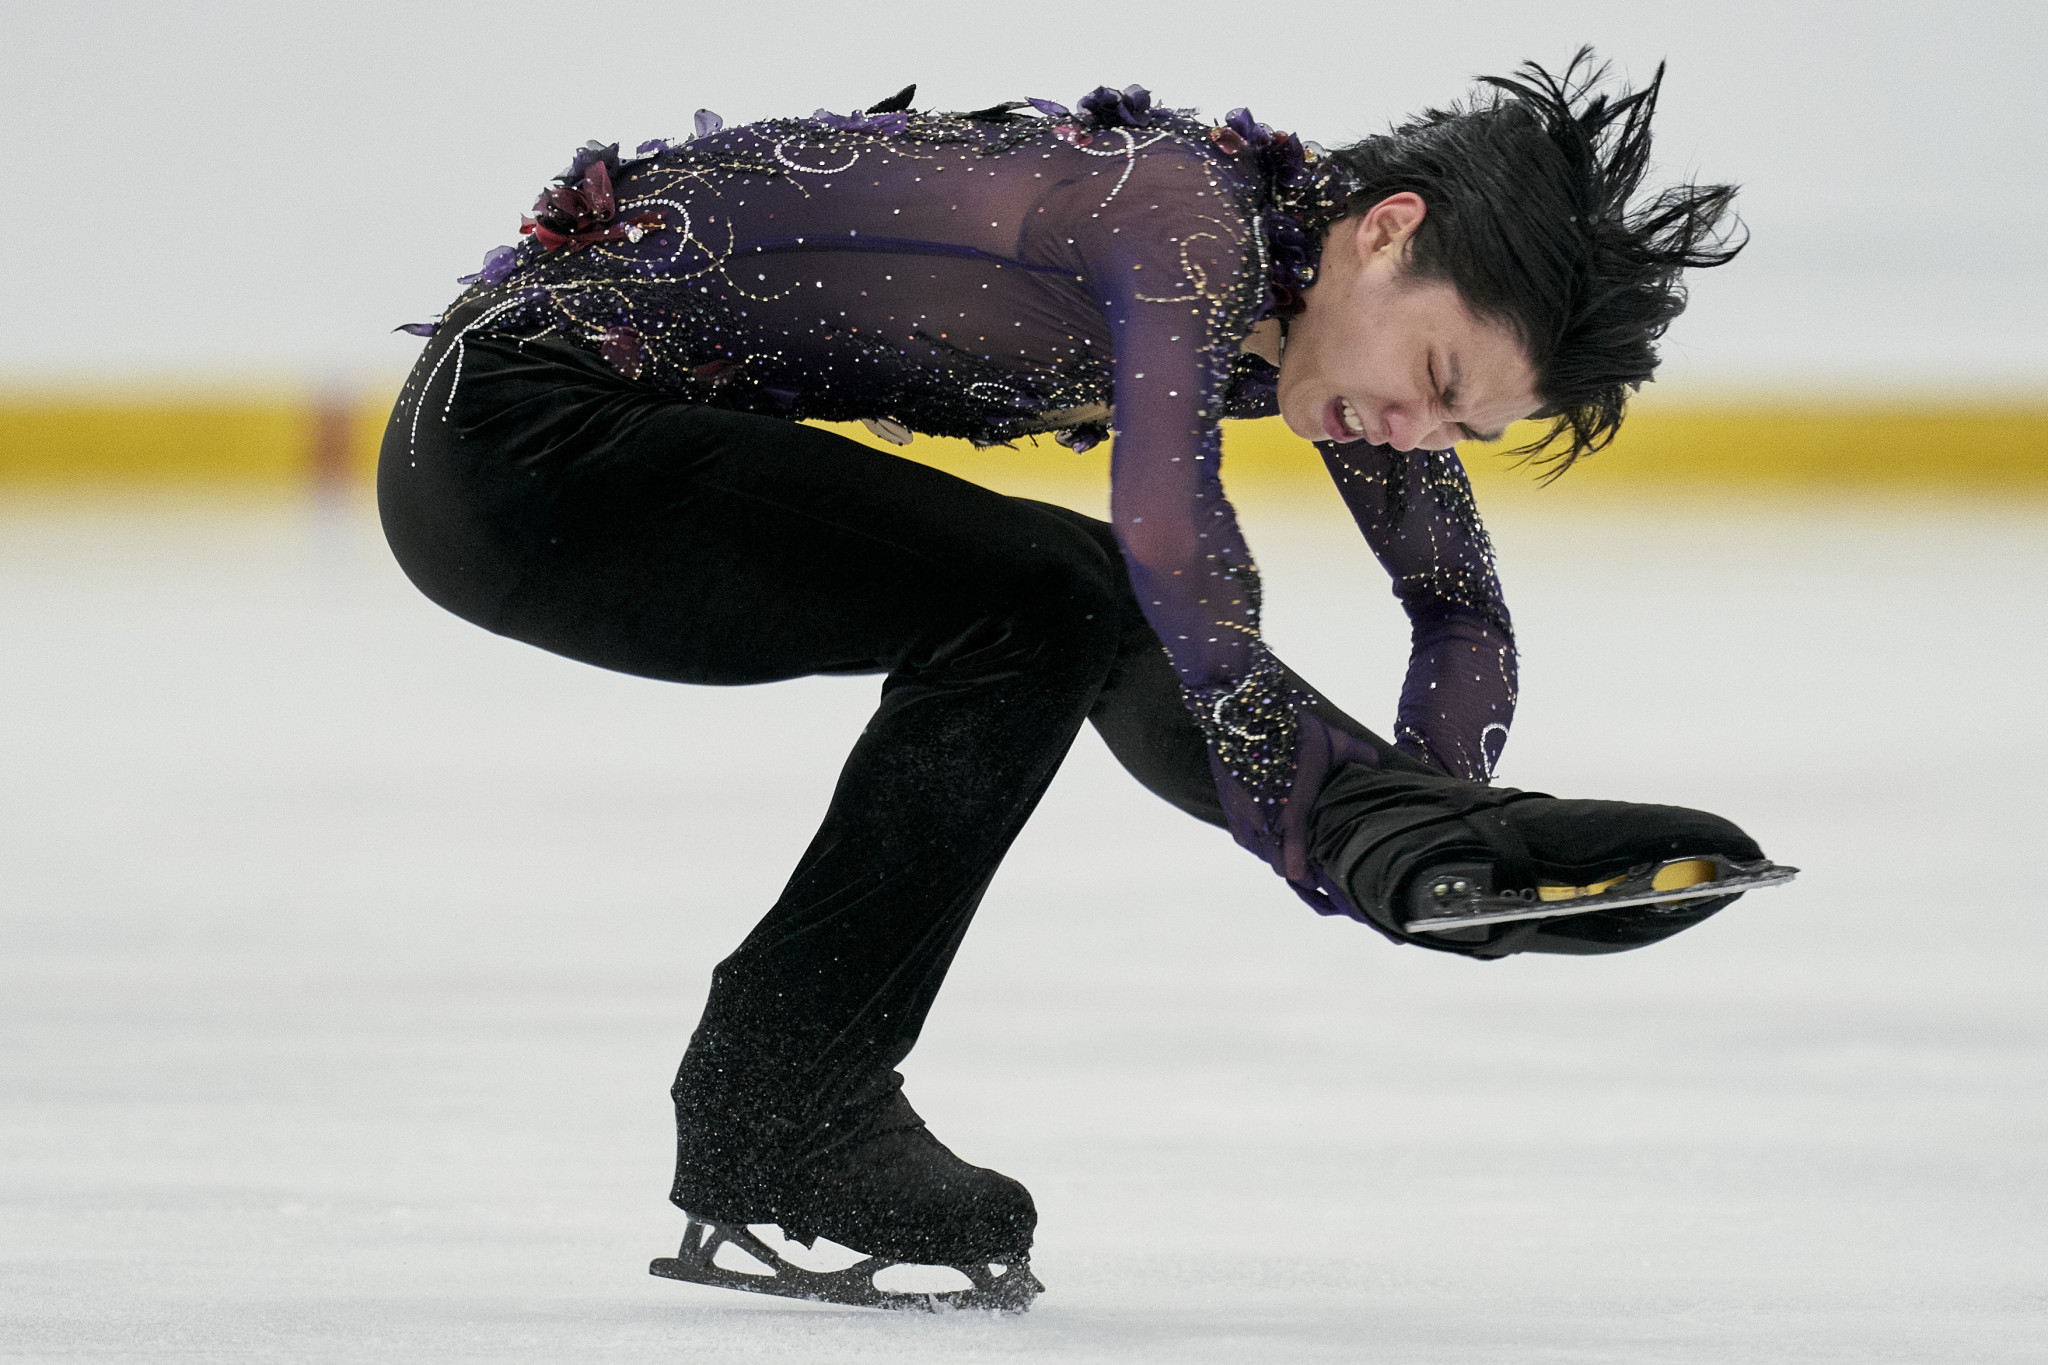 Japanese double Olympic champion Yuzuru Hanyu will compete at Skate Canada ©Getty Images